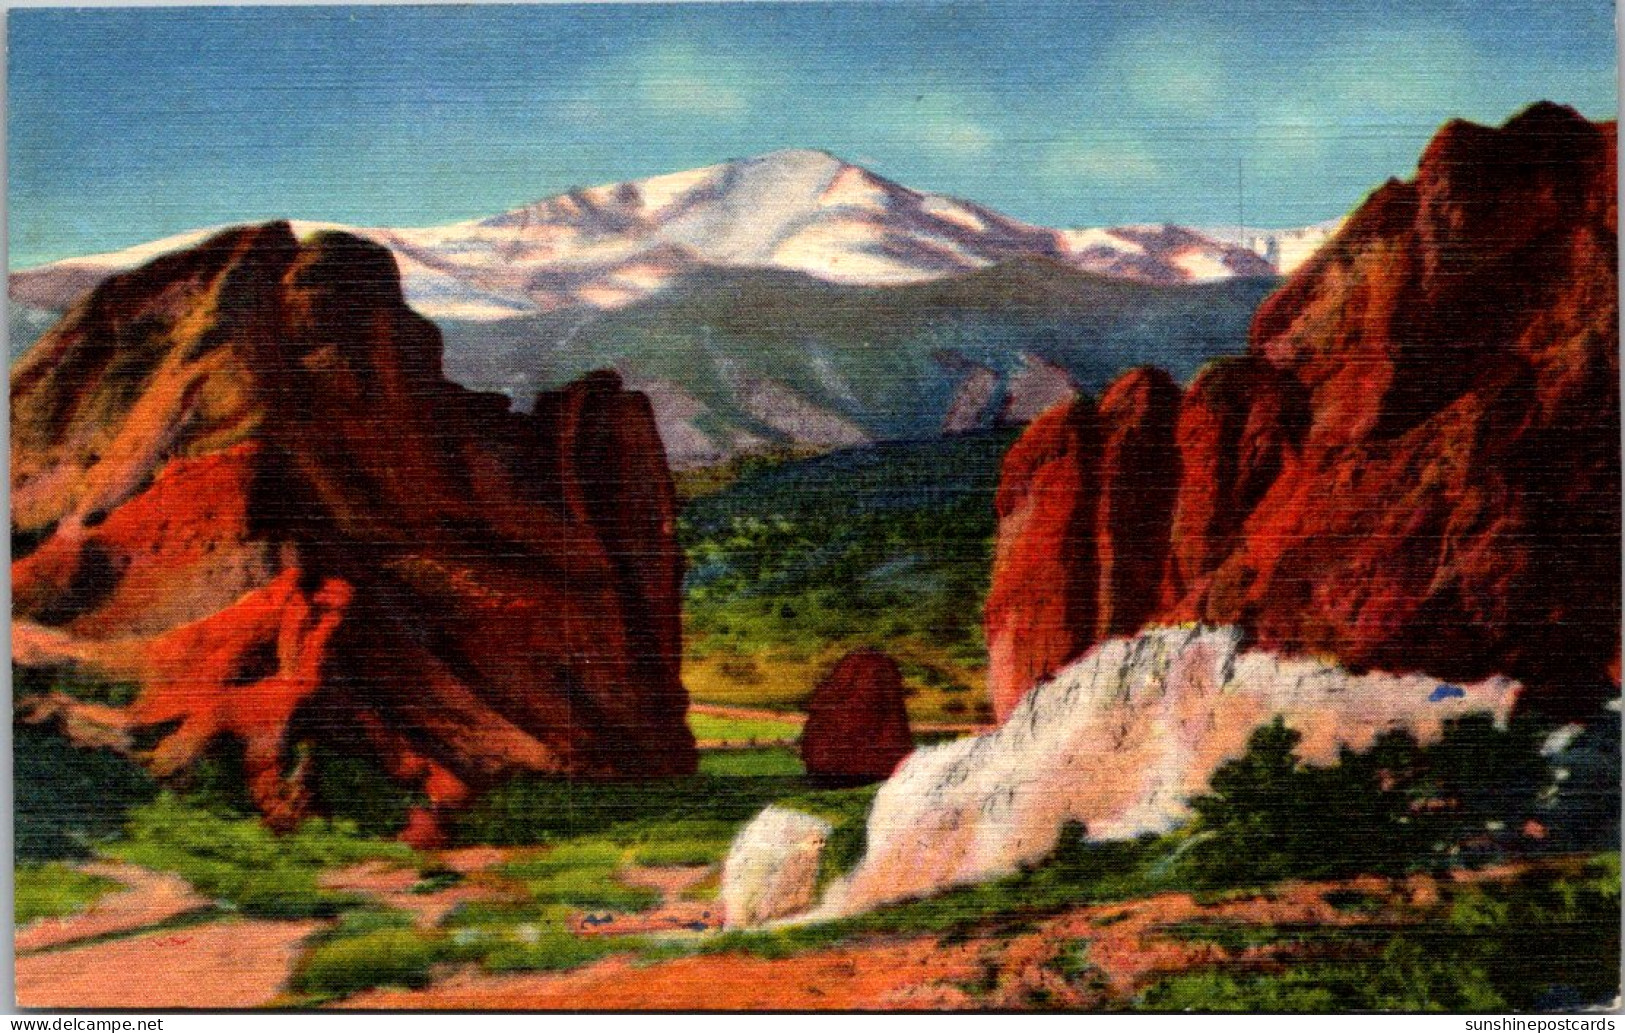 Colorado Pikes Peak And Gateway Of The Garden Of The Gods Curteich - Rocky Mountains